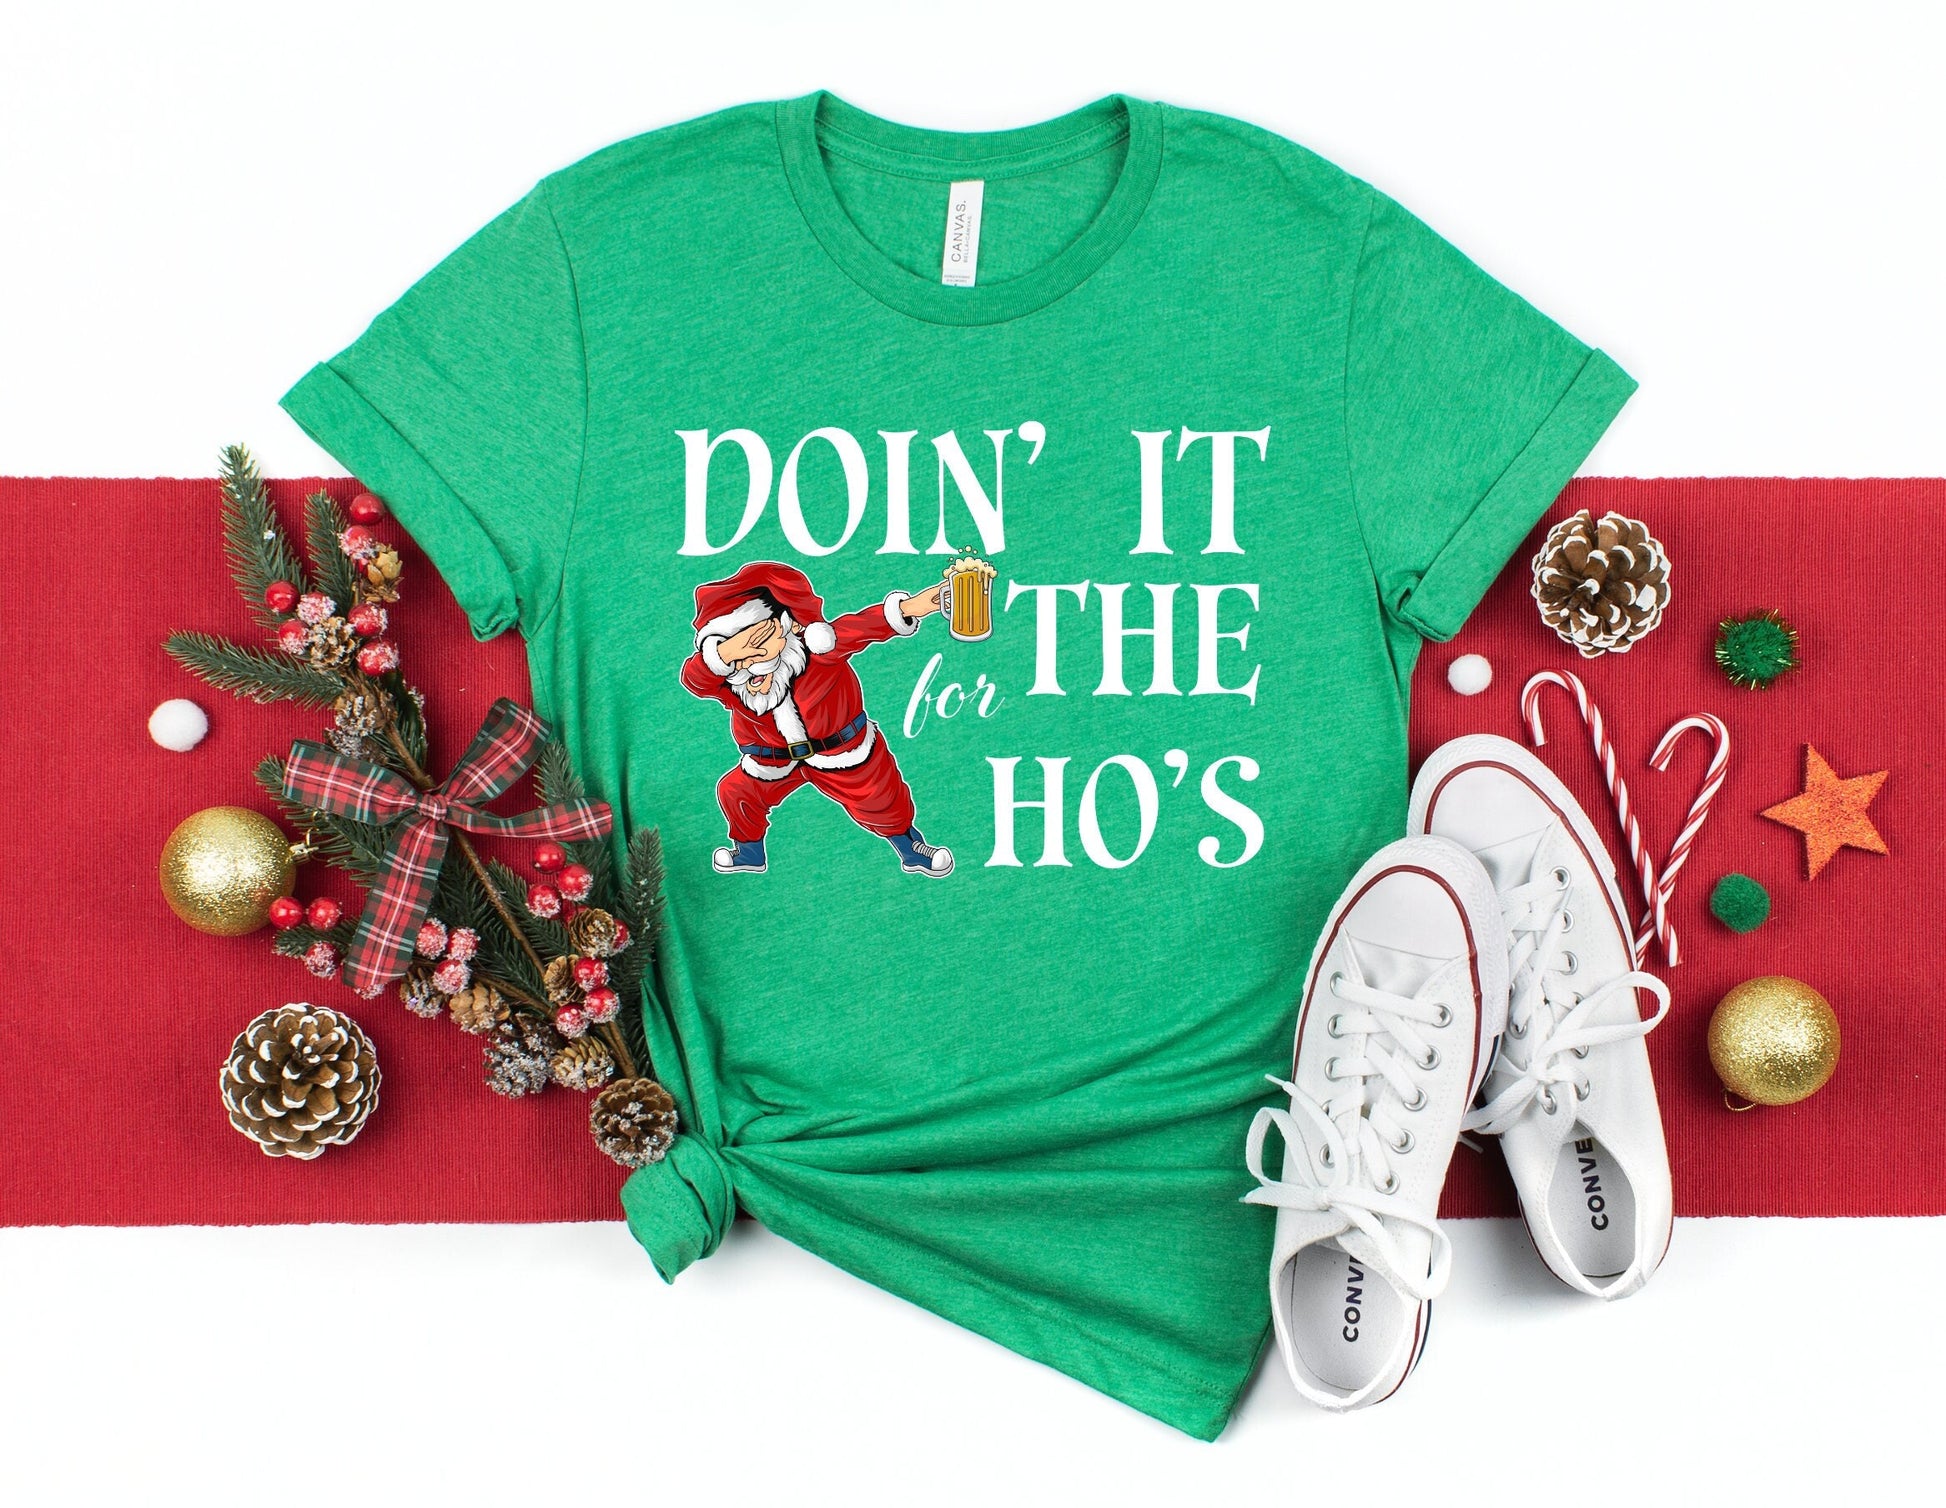 The Santa Claus Doing it for the Hos, Christmas Shirt Makes the Perfect Gift for Friends, Family, Coworkers or yourself.  Check Out My Shop for even more Great Designs.  www.scorpiontees.etsy.com